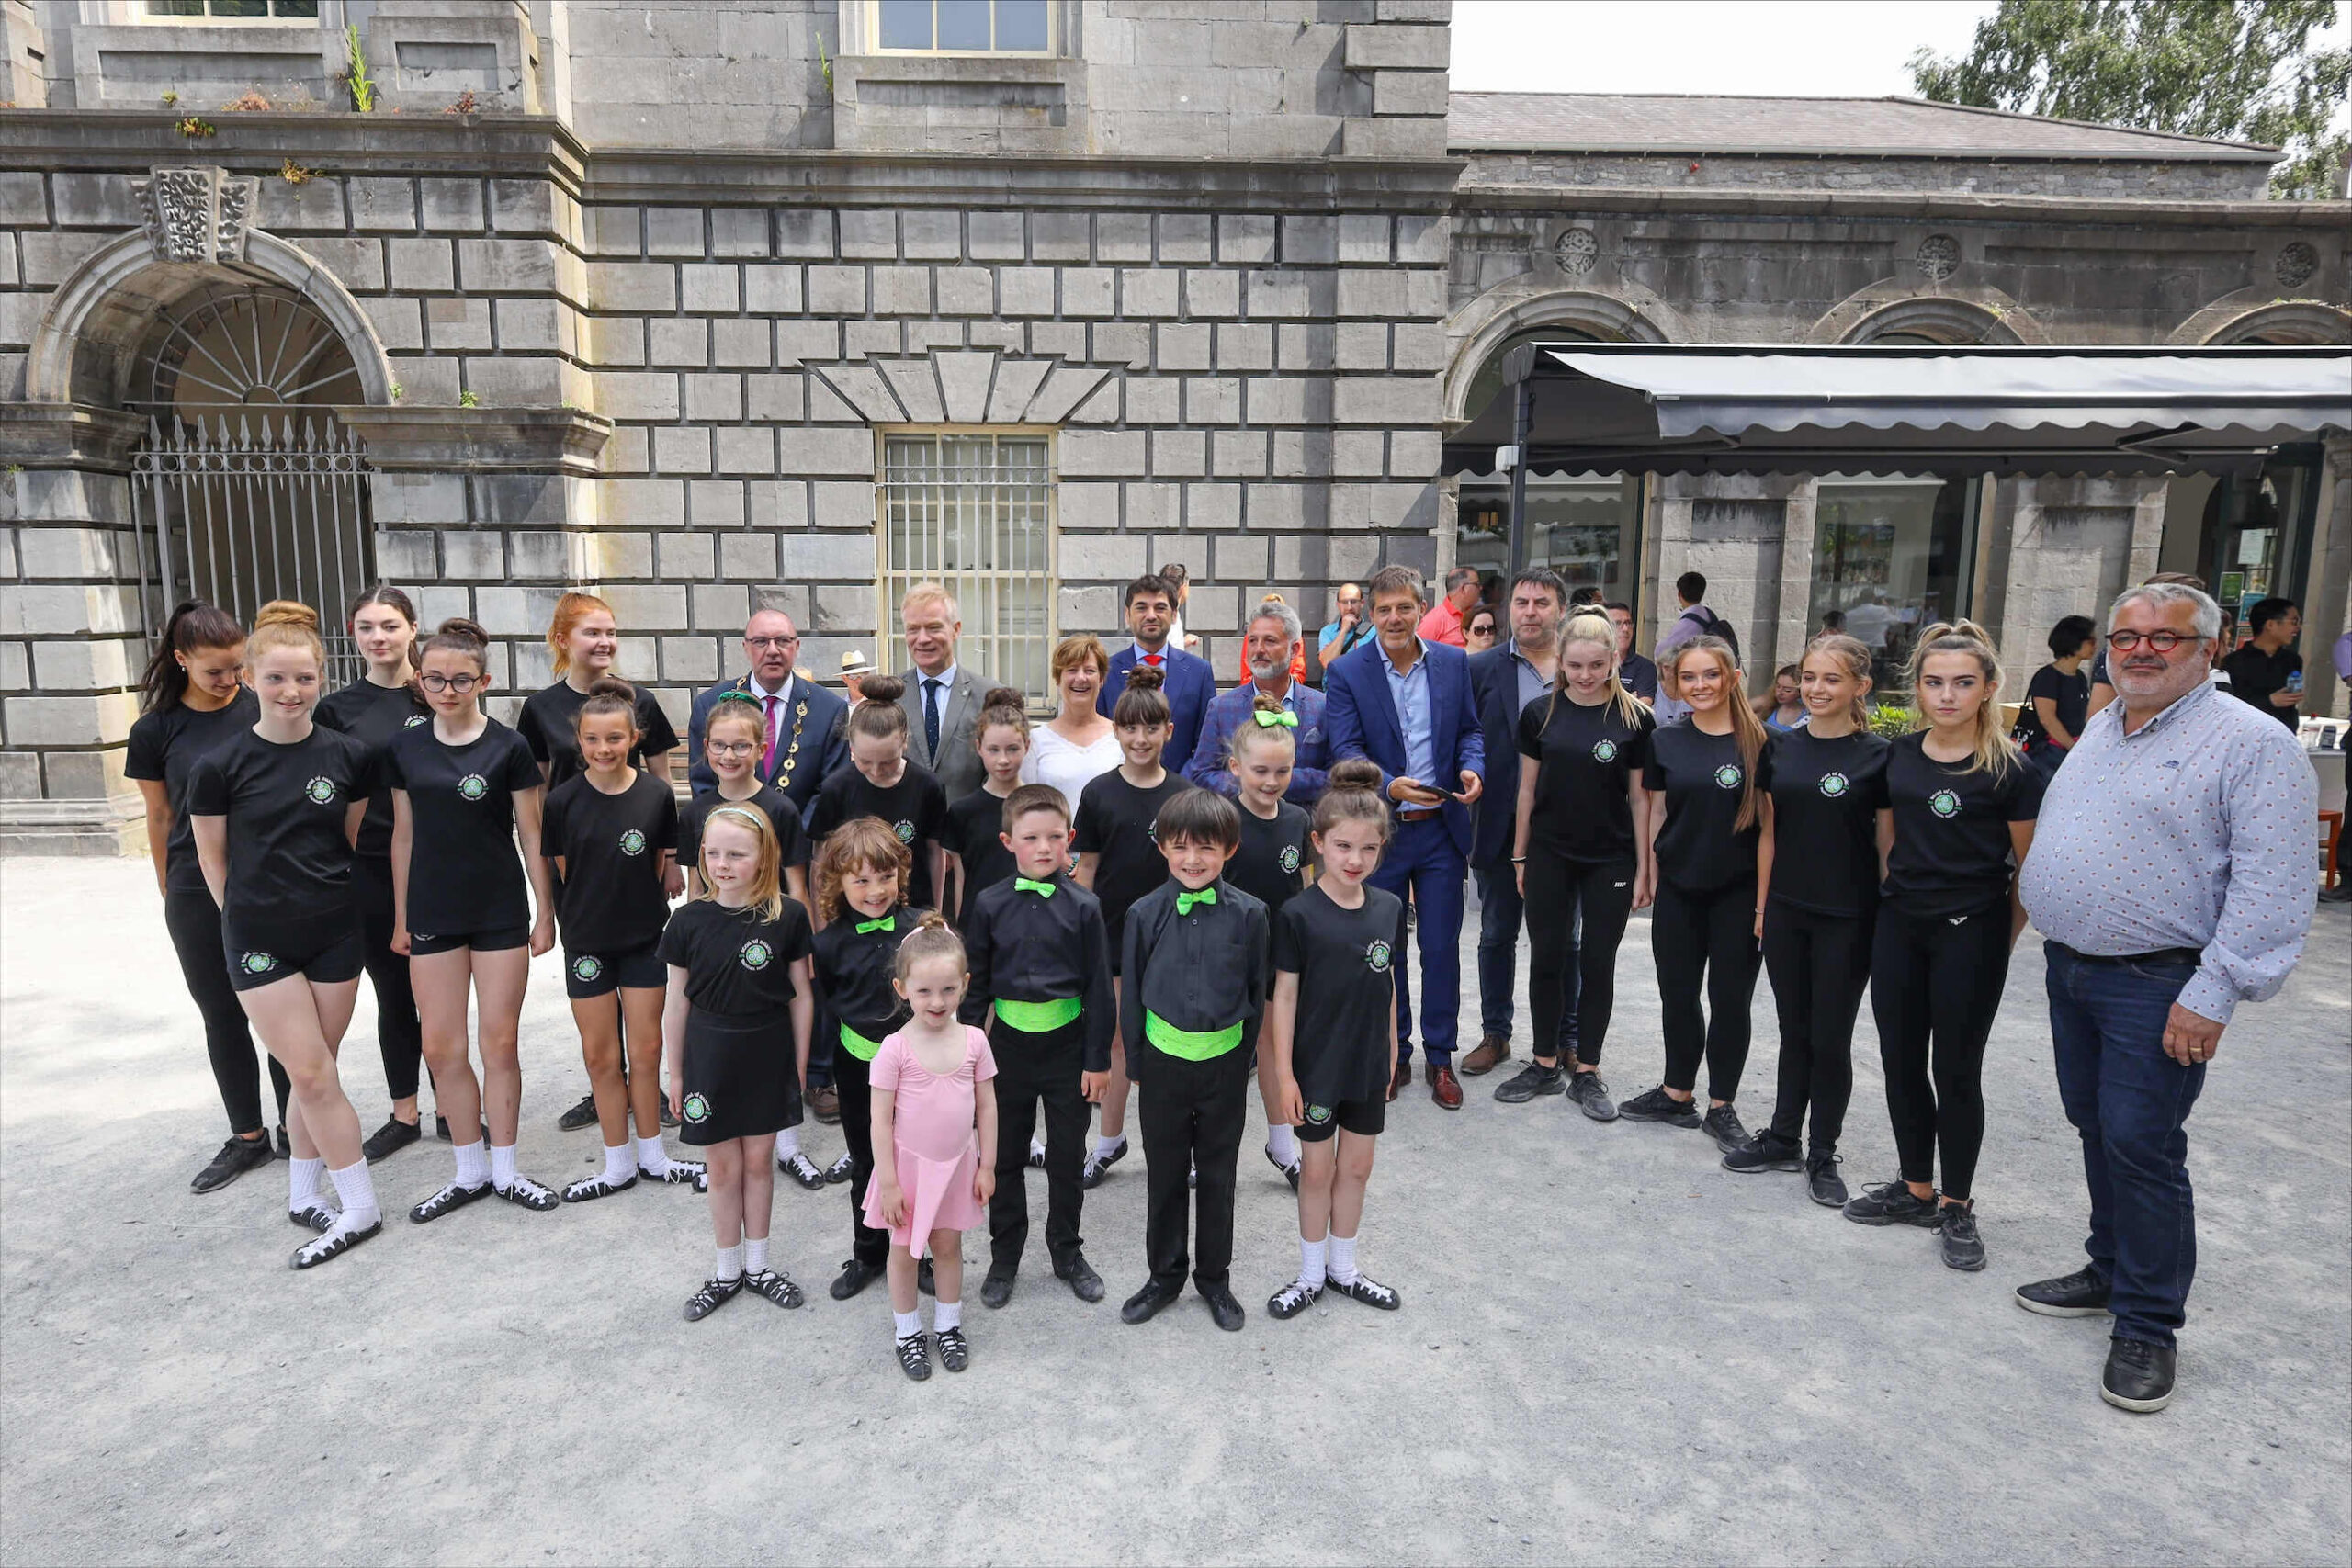 On August 3, Limerick City will feature on RTÉ Nationwide with a programme dedicated to Limerick Bastille Day Wild Geese Festival 2022